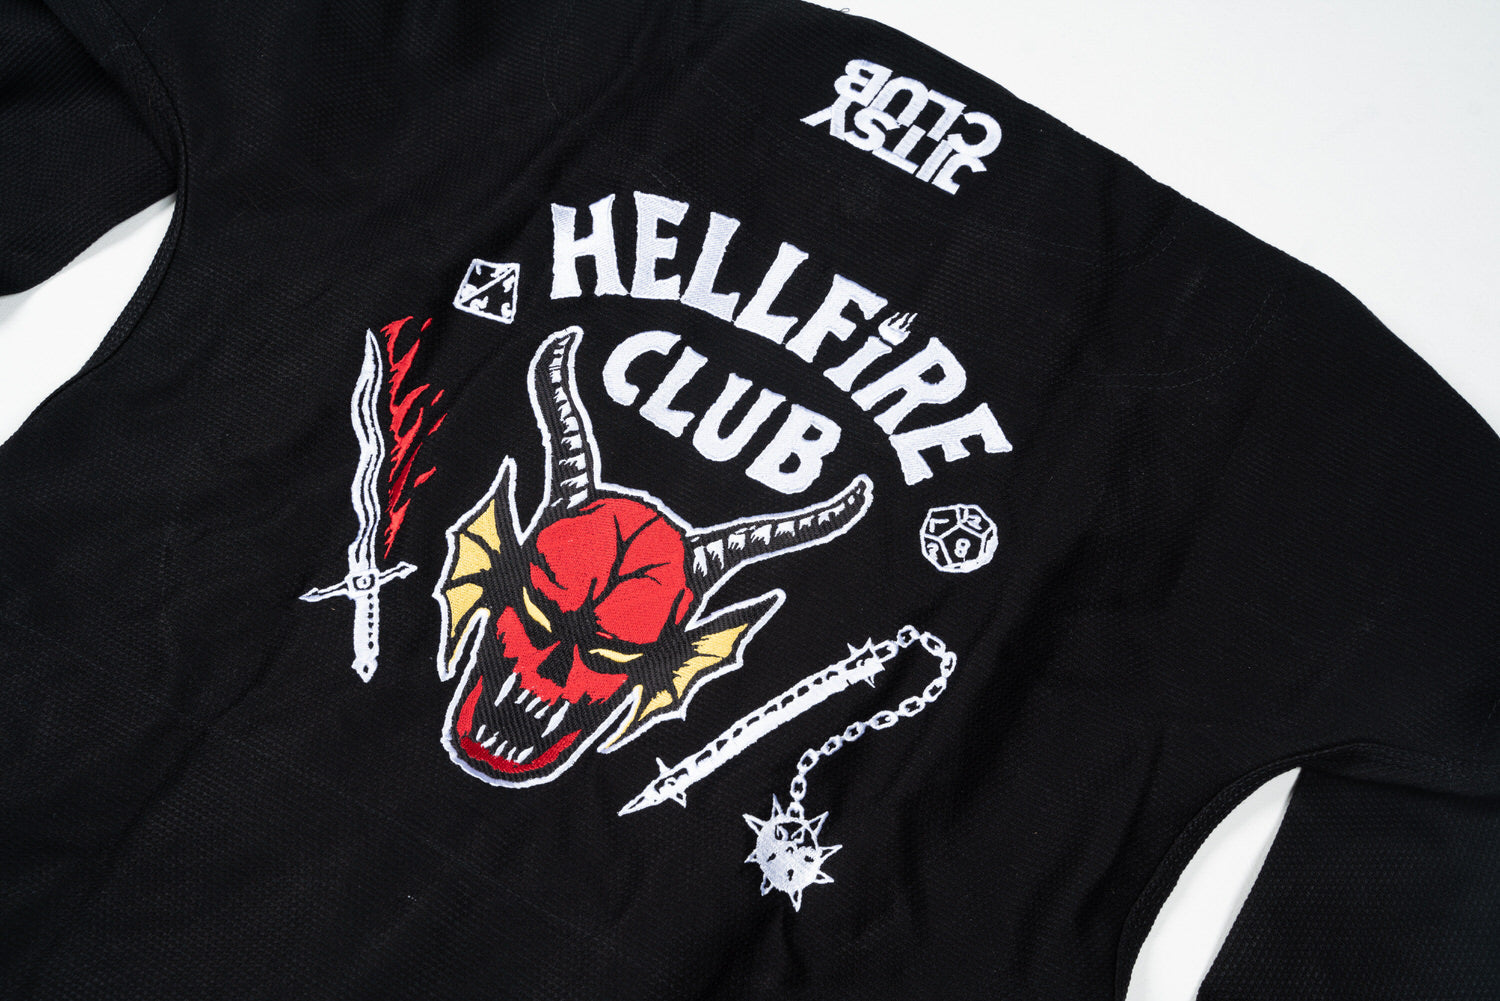 ᓚᘏᗢ nade on X: hellfire club shirt i made for cult pixie! 👹    / X